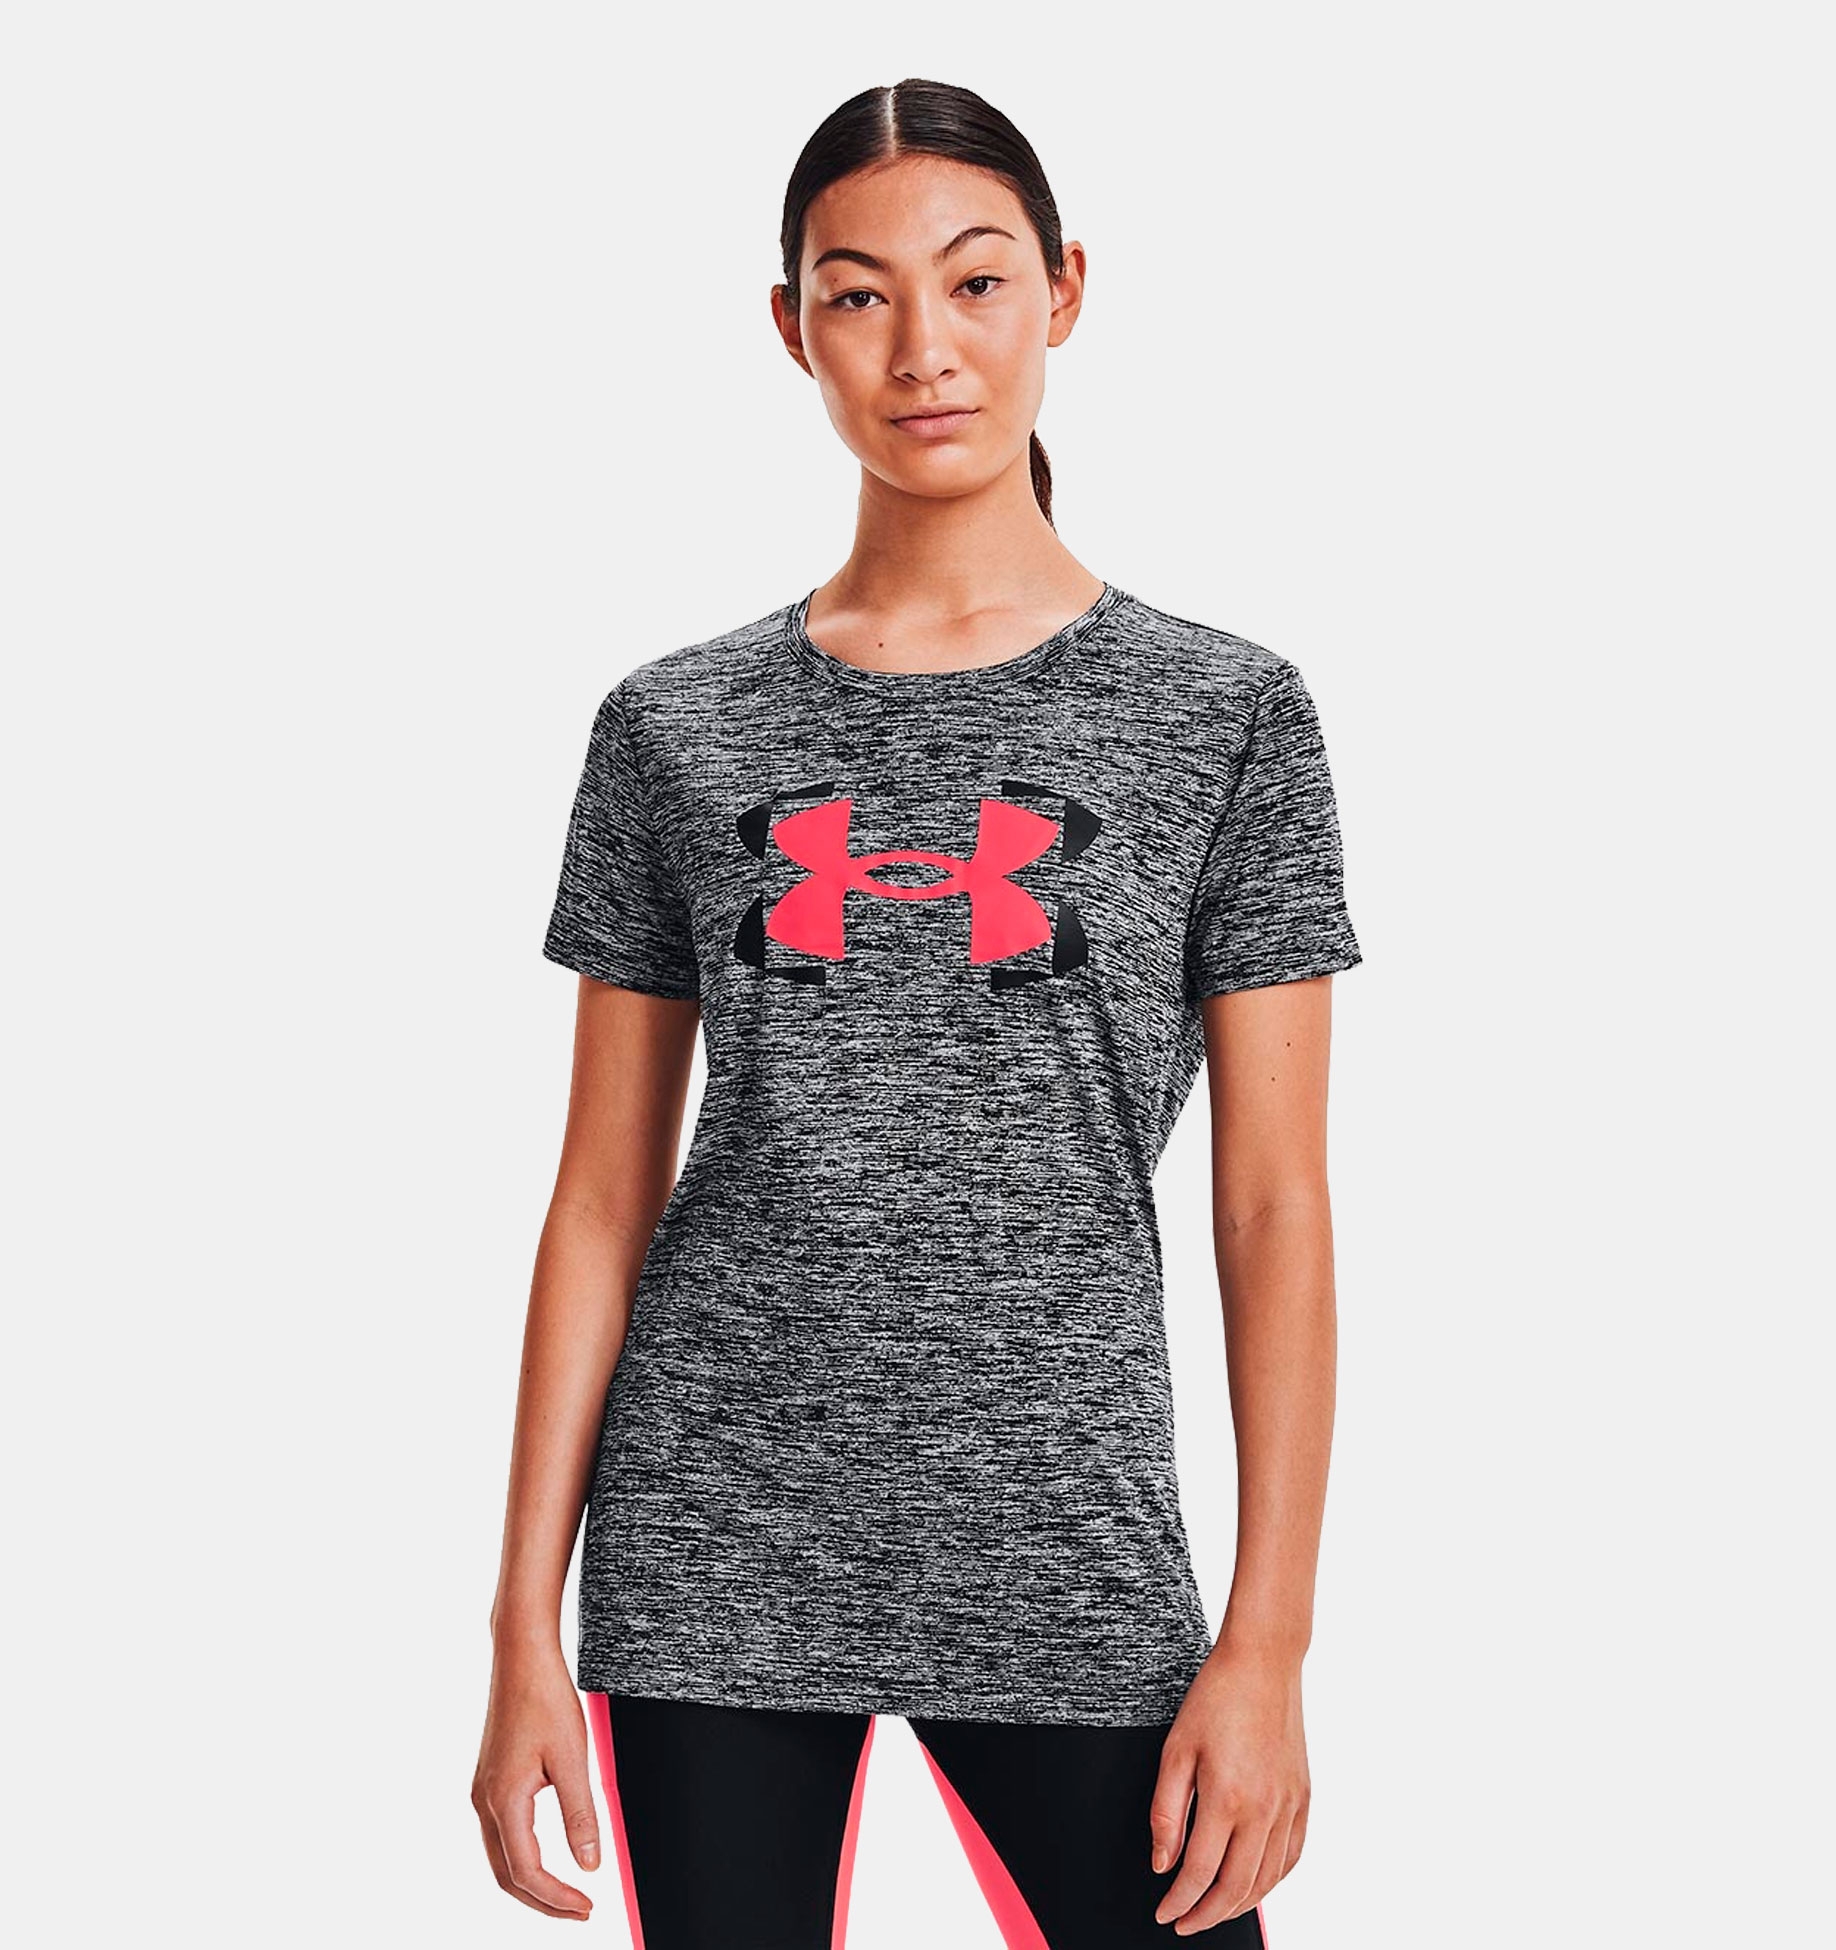 Remera Entrenamiento Under Armour Overszed Gp Mujer